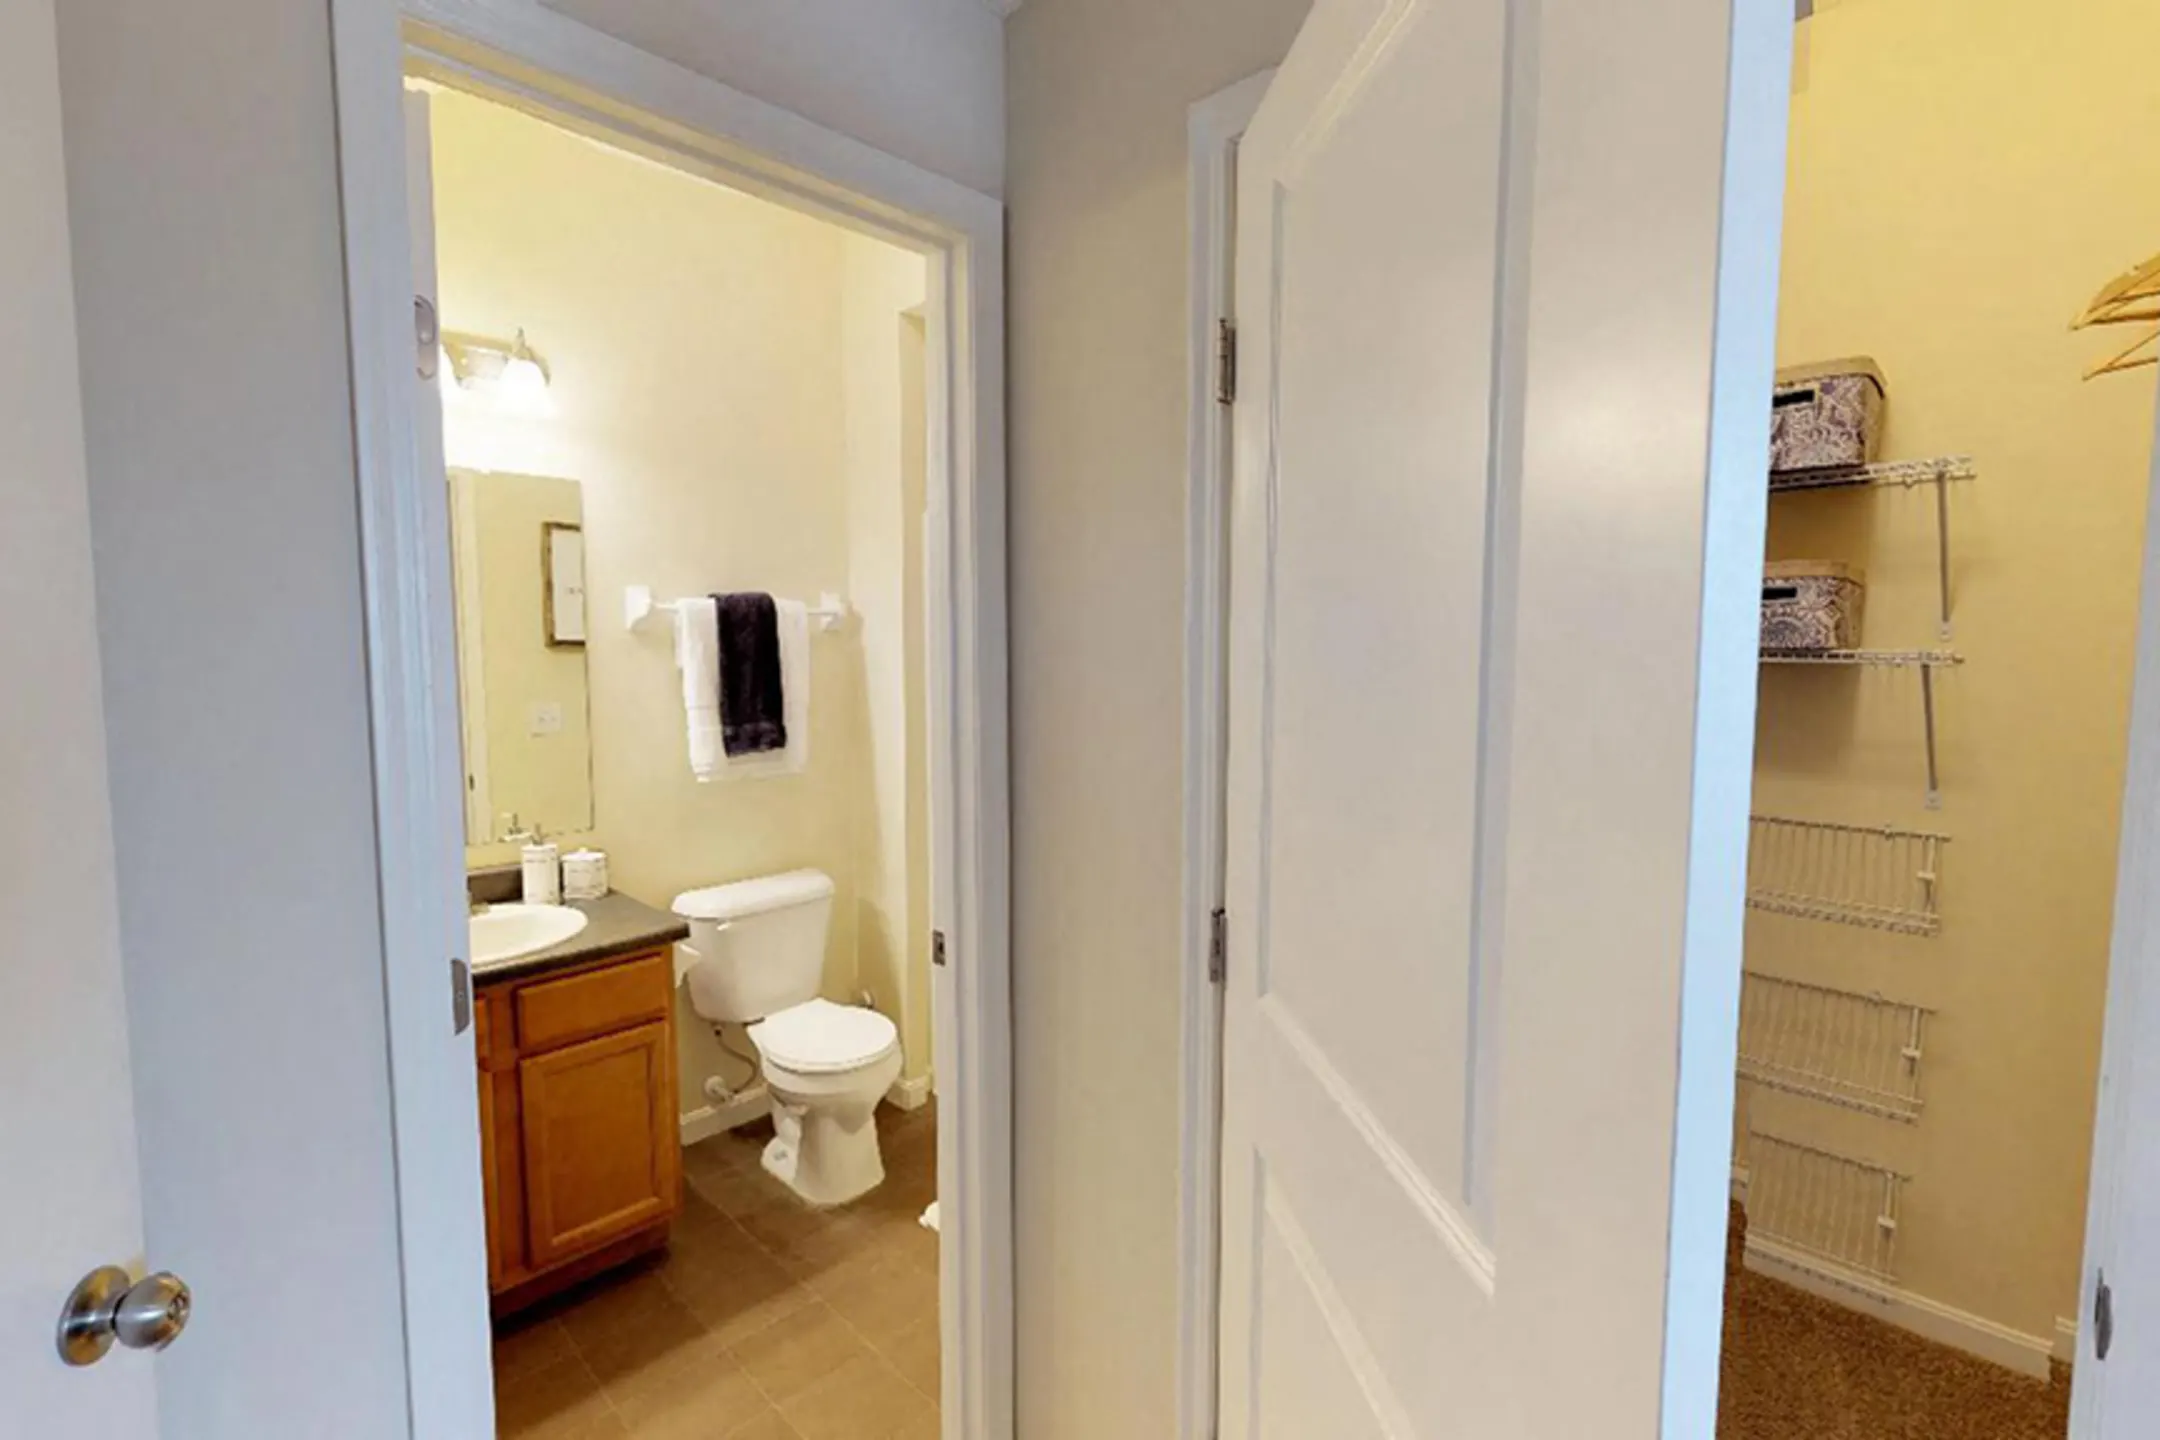 Bathroom - Residences at Northgate Crossing - Columbus, OH